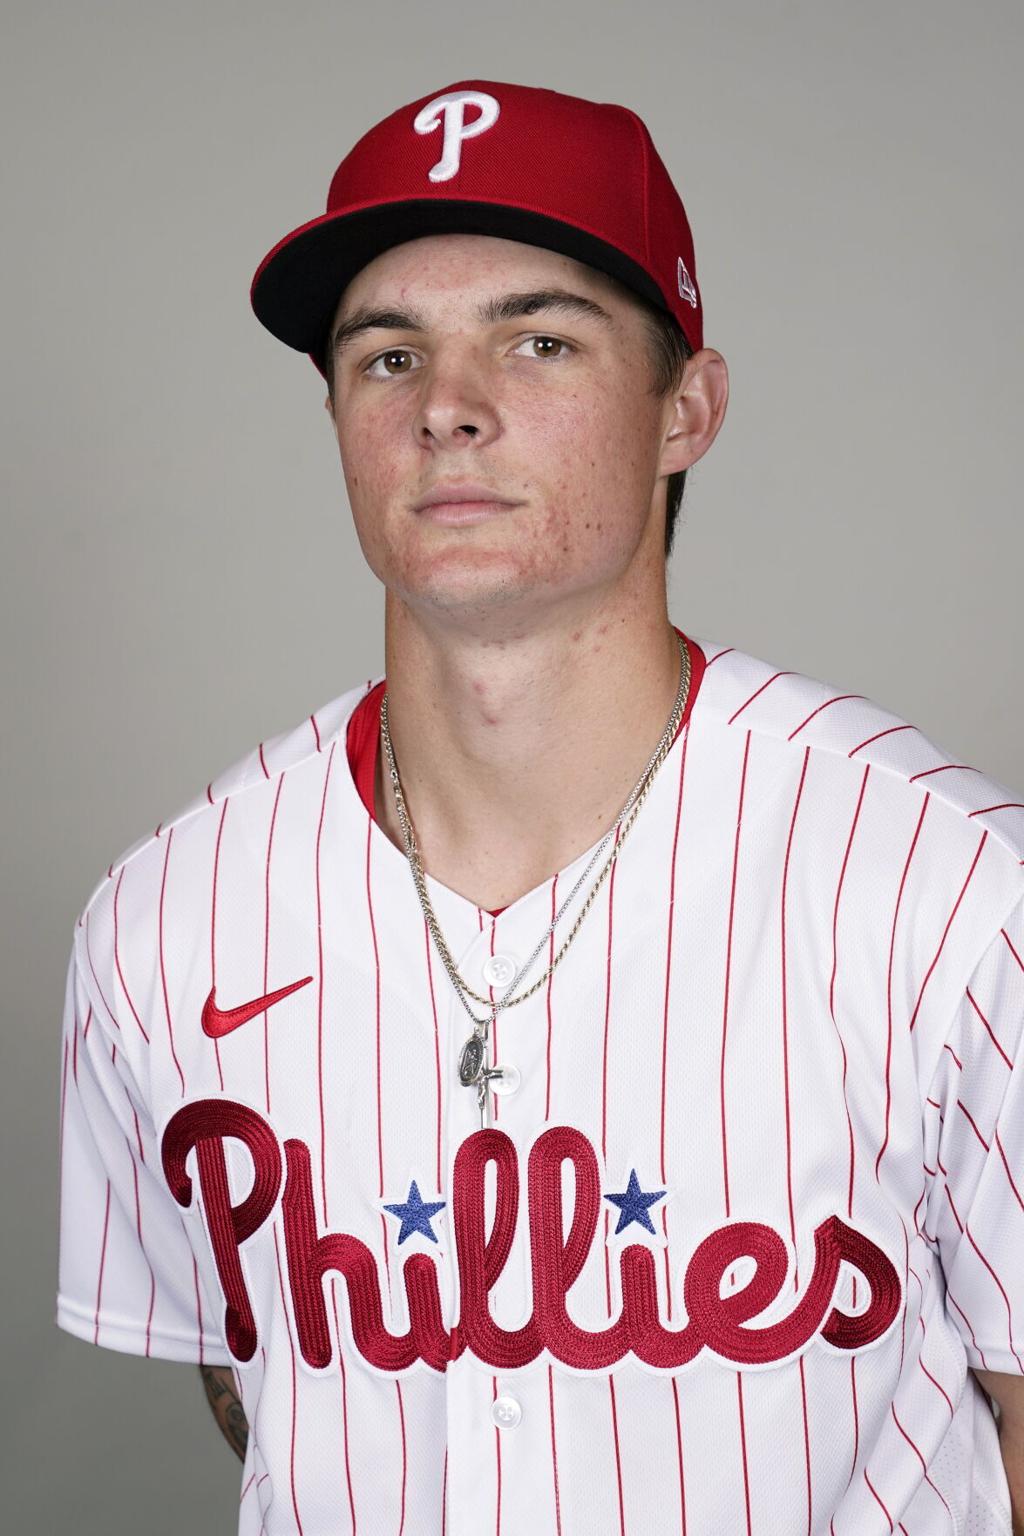 Former Phillies OF Mickey Moniak suffers another season-altering